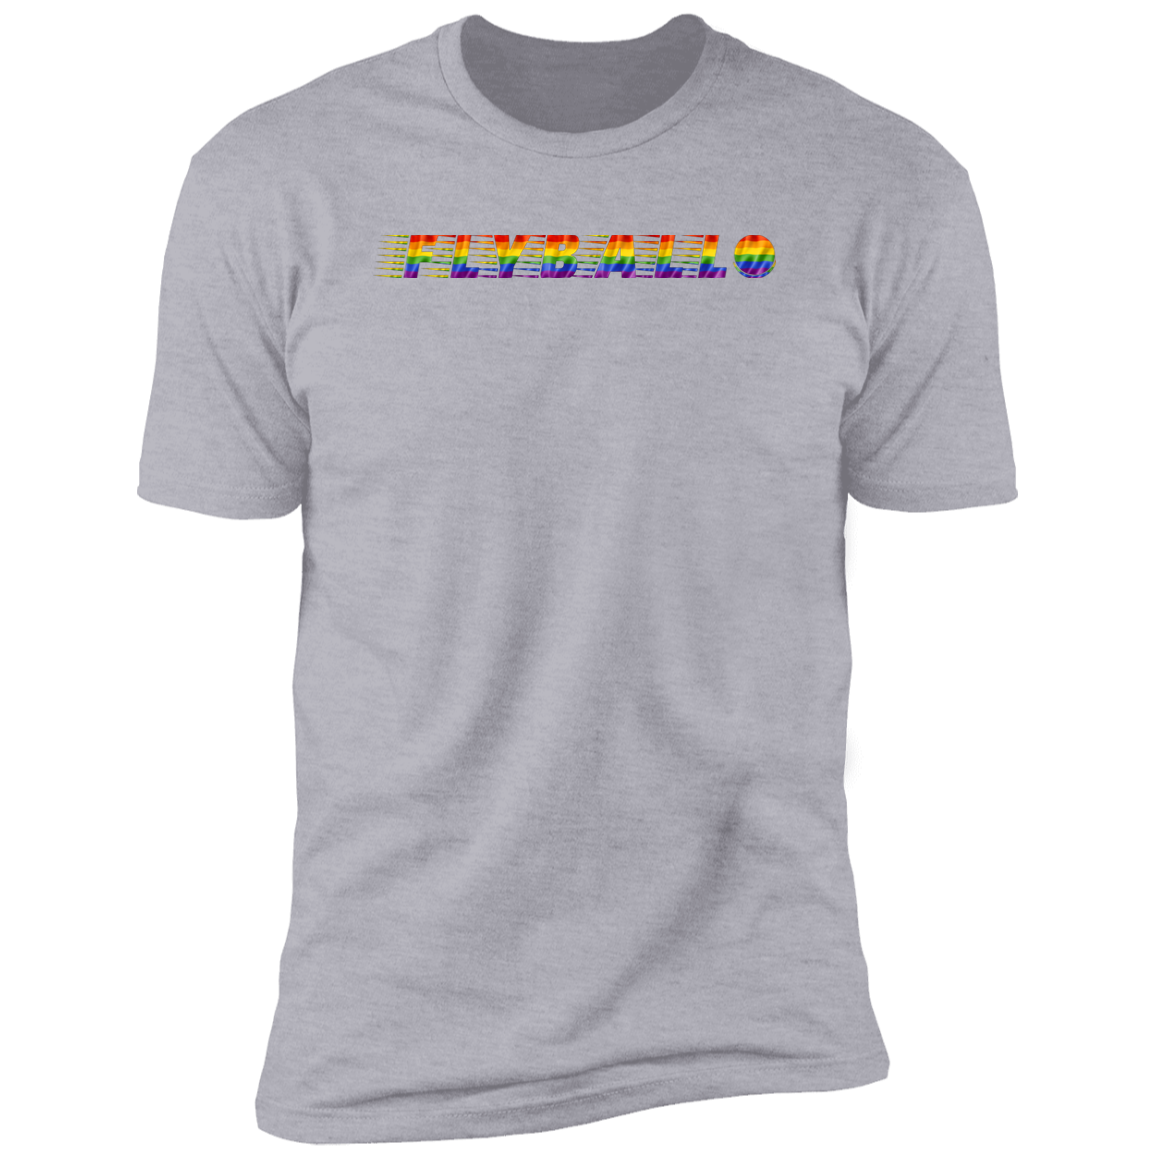 Flyball pride t-shirt, dog pride dog flyball shirt for humans, in light heather gray